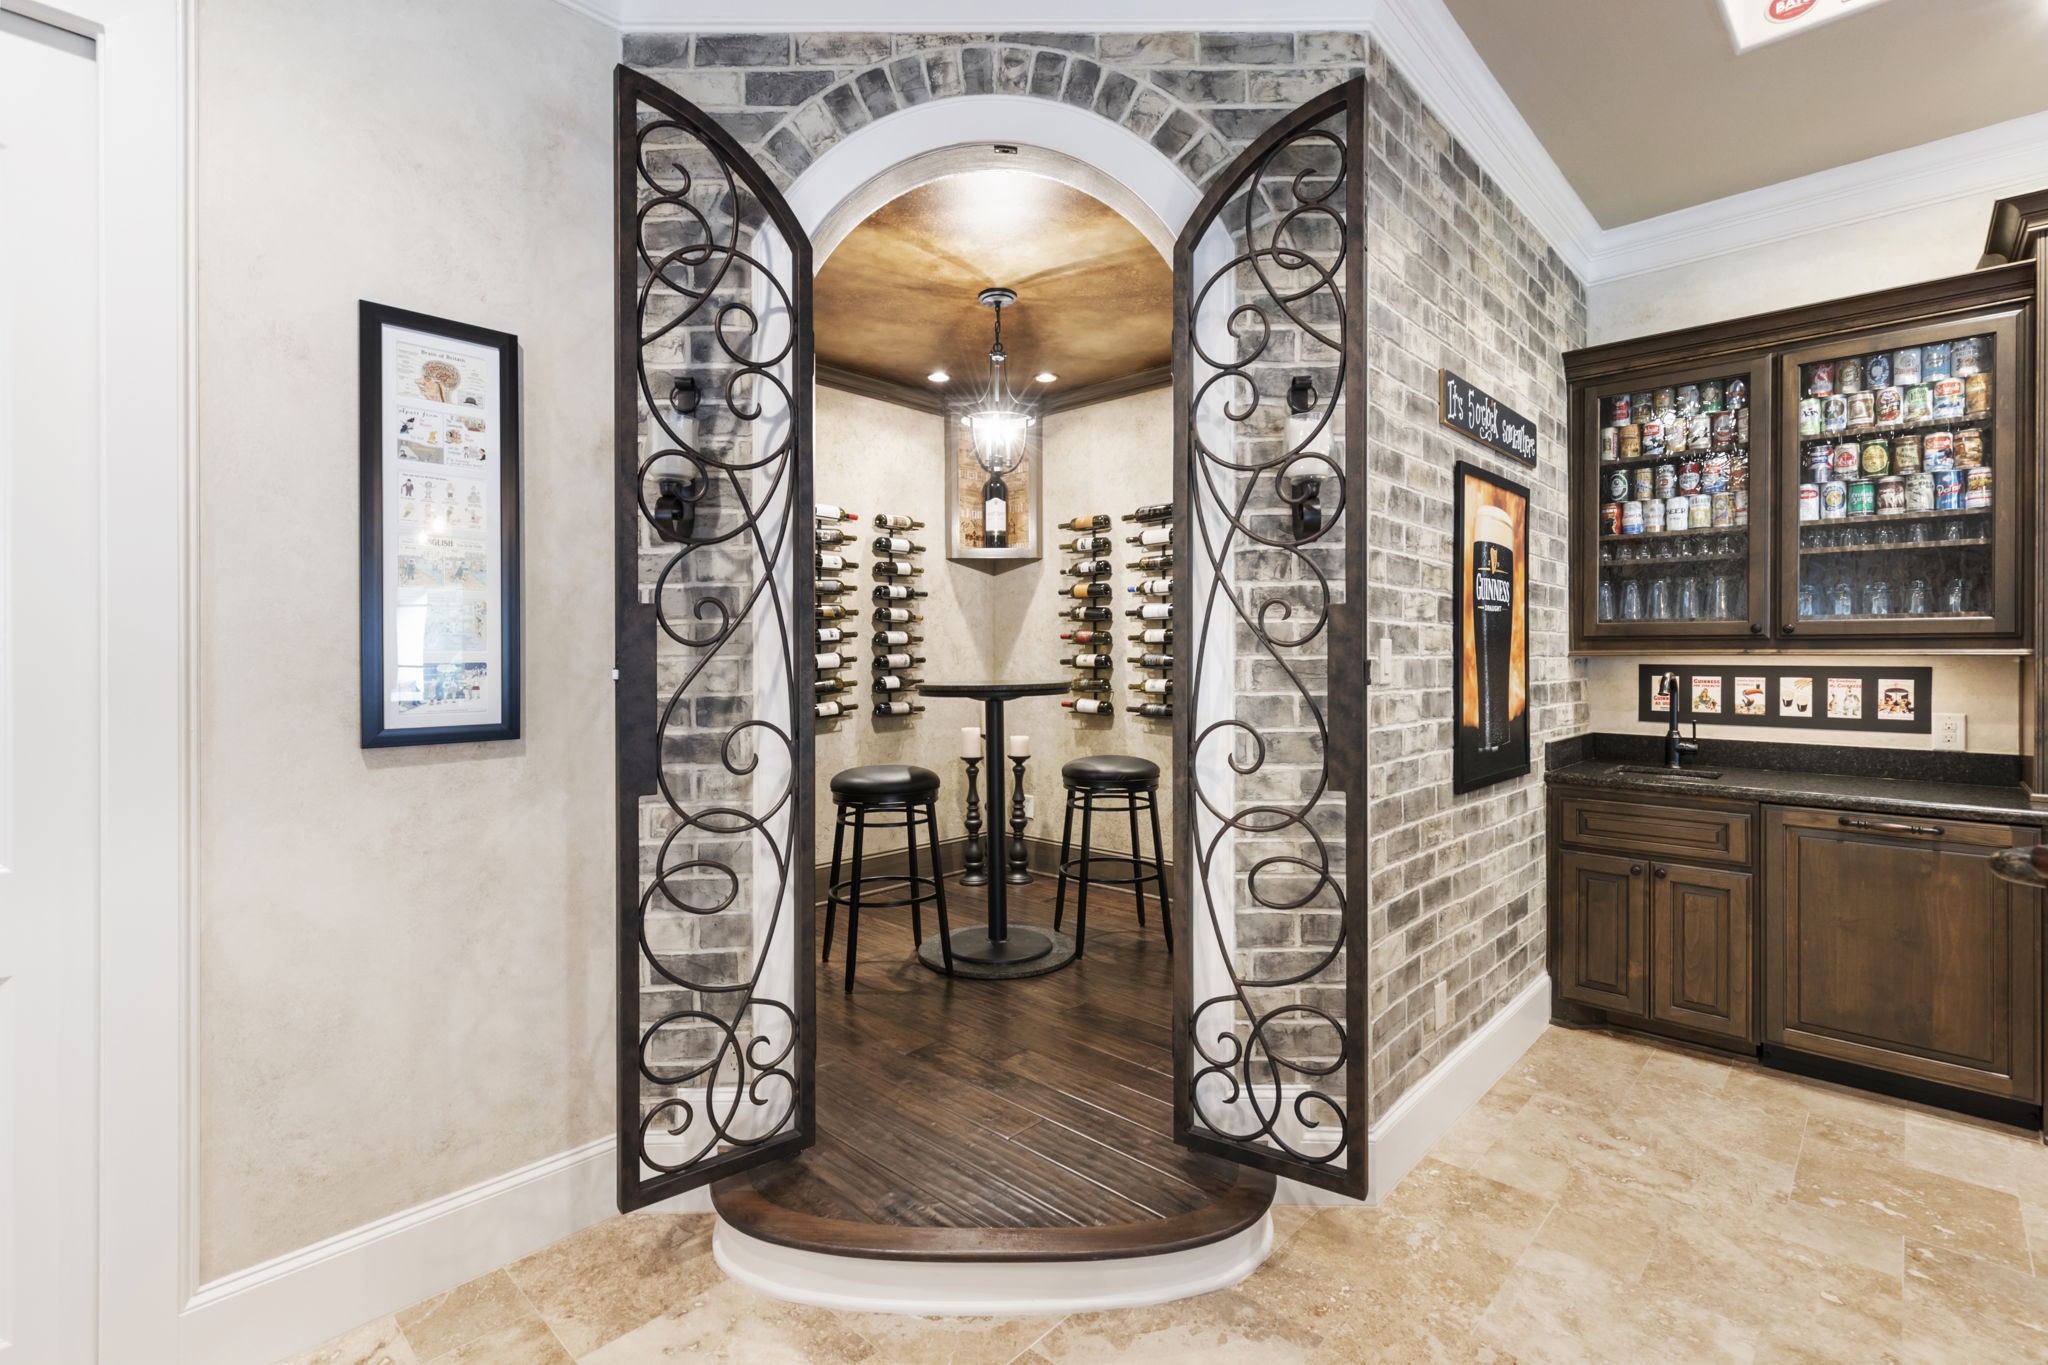 Intimate wine grotto for private wine tastings and a great place to house your favorite vintages.